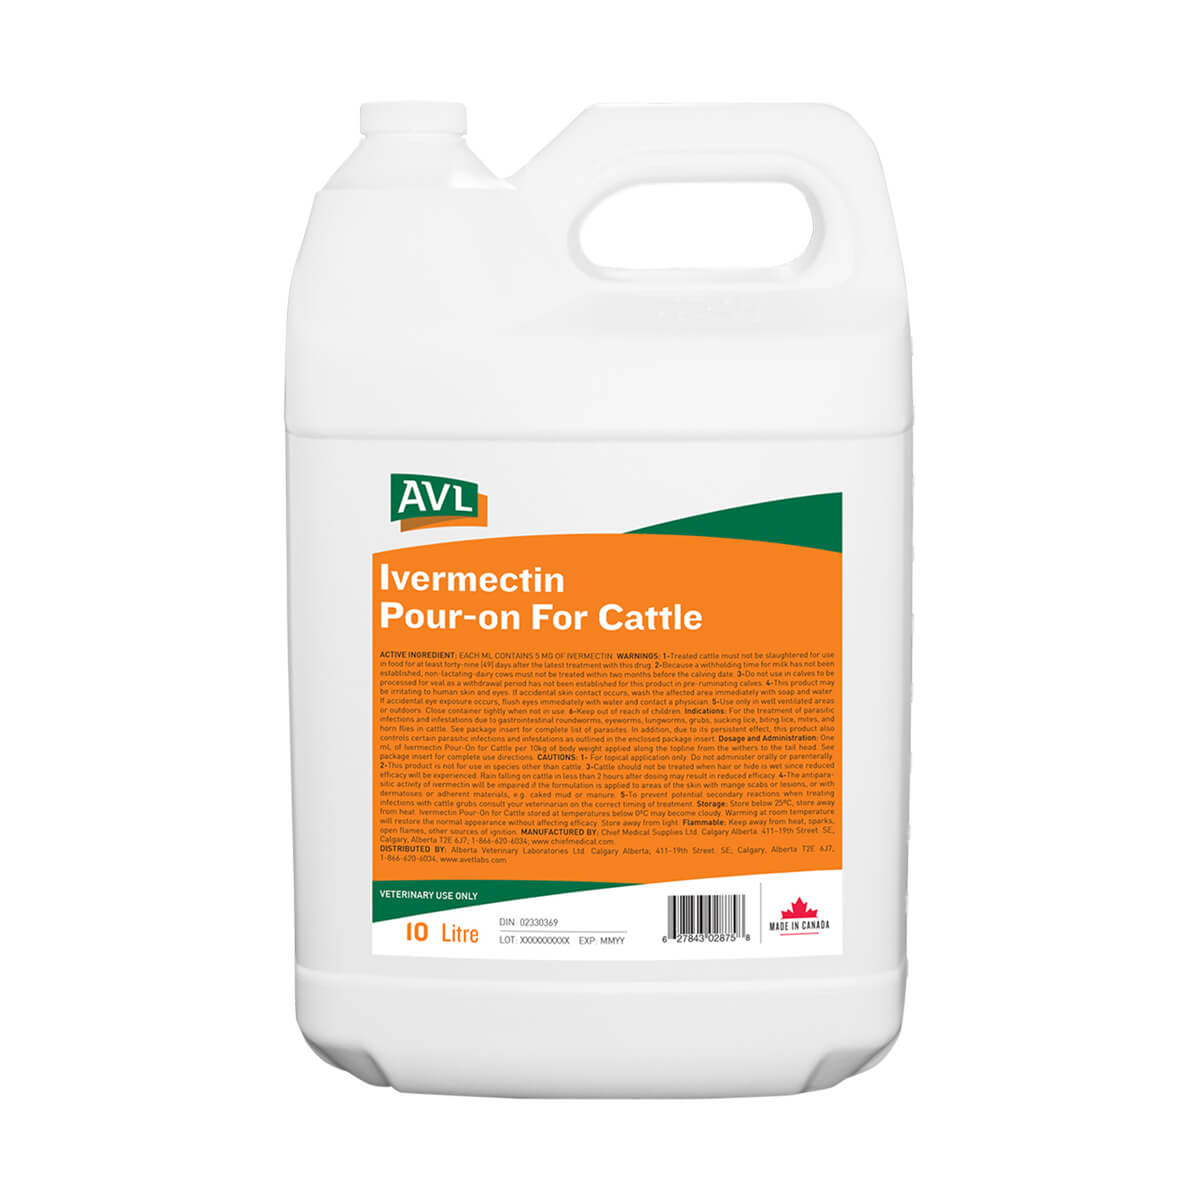 AVL Ivermectin Pour-on For Cattle - 10 L